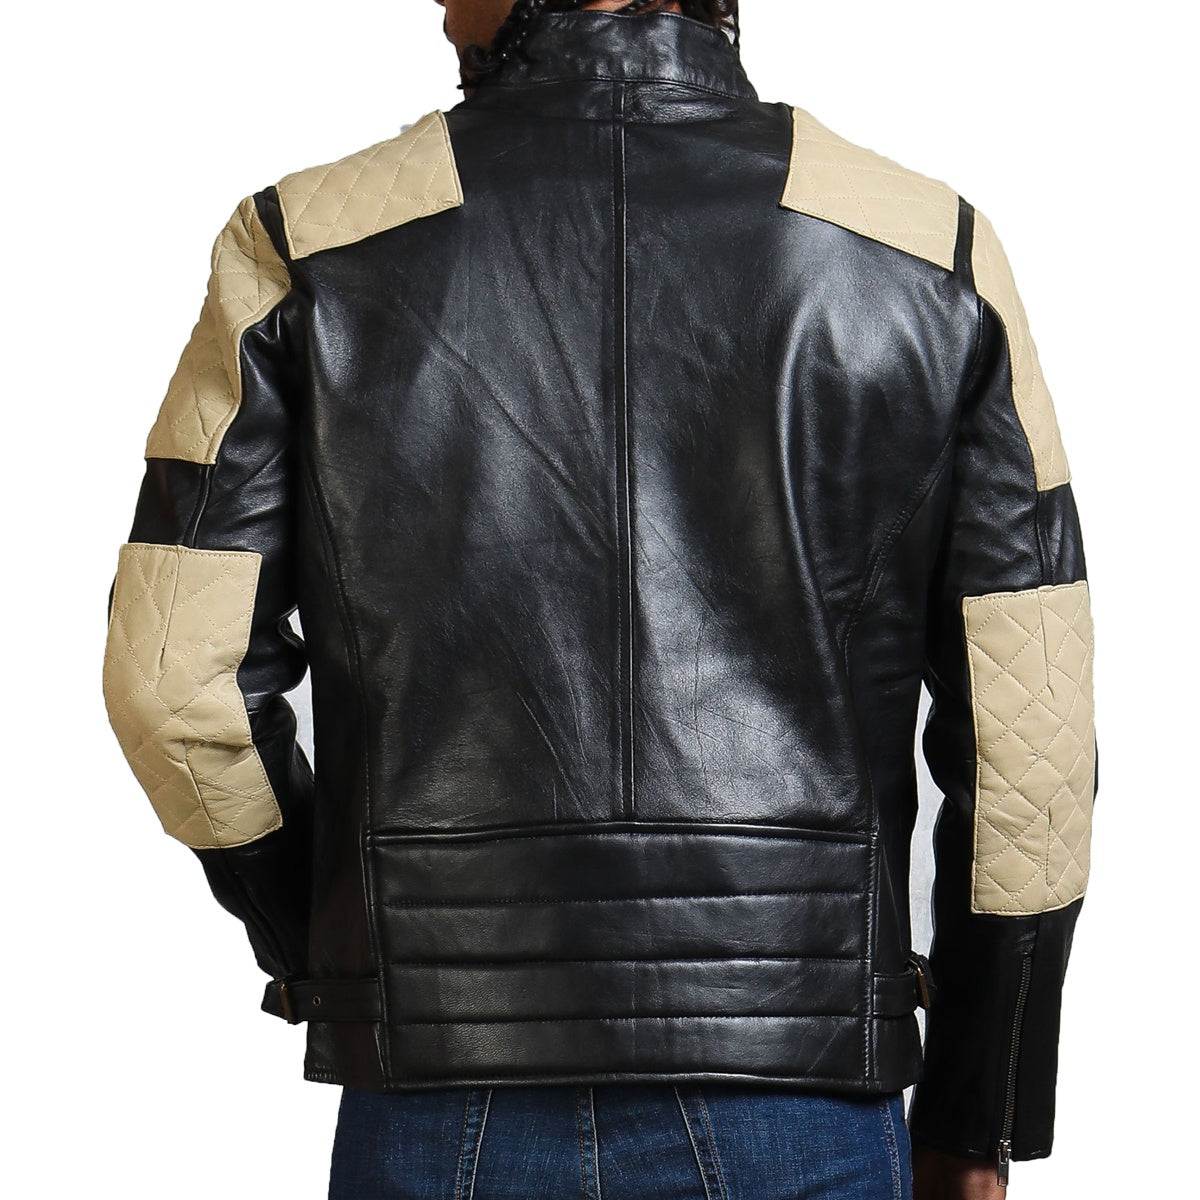 Black Motorcycle Jacket With White Quilted Patches